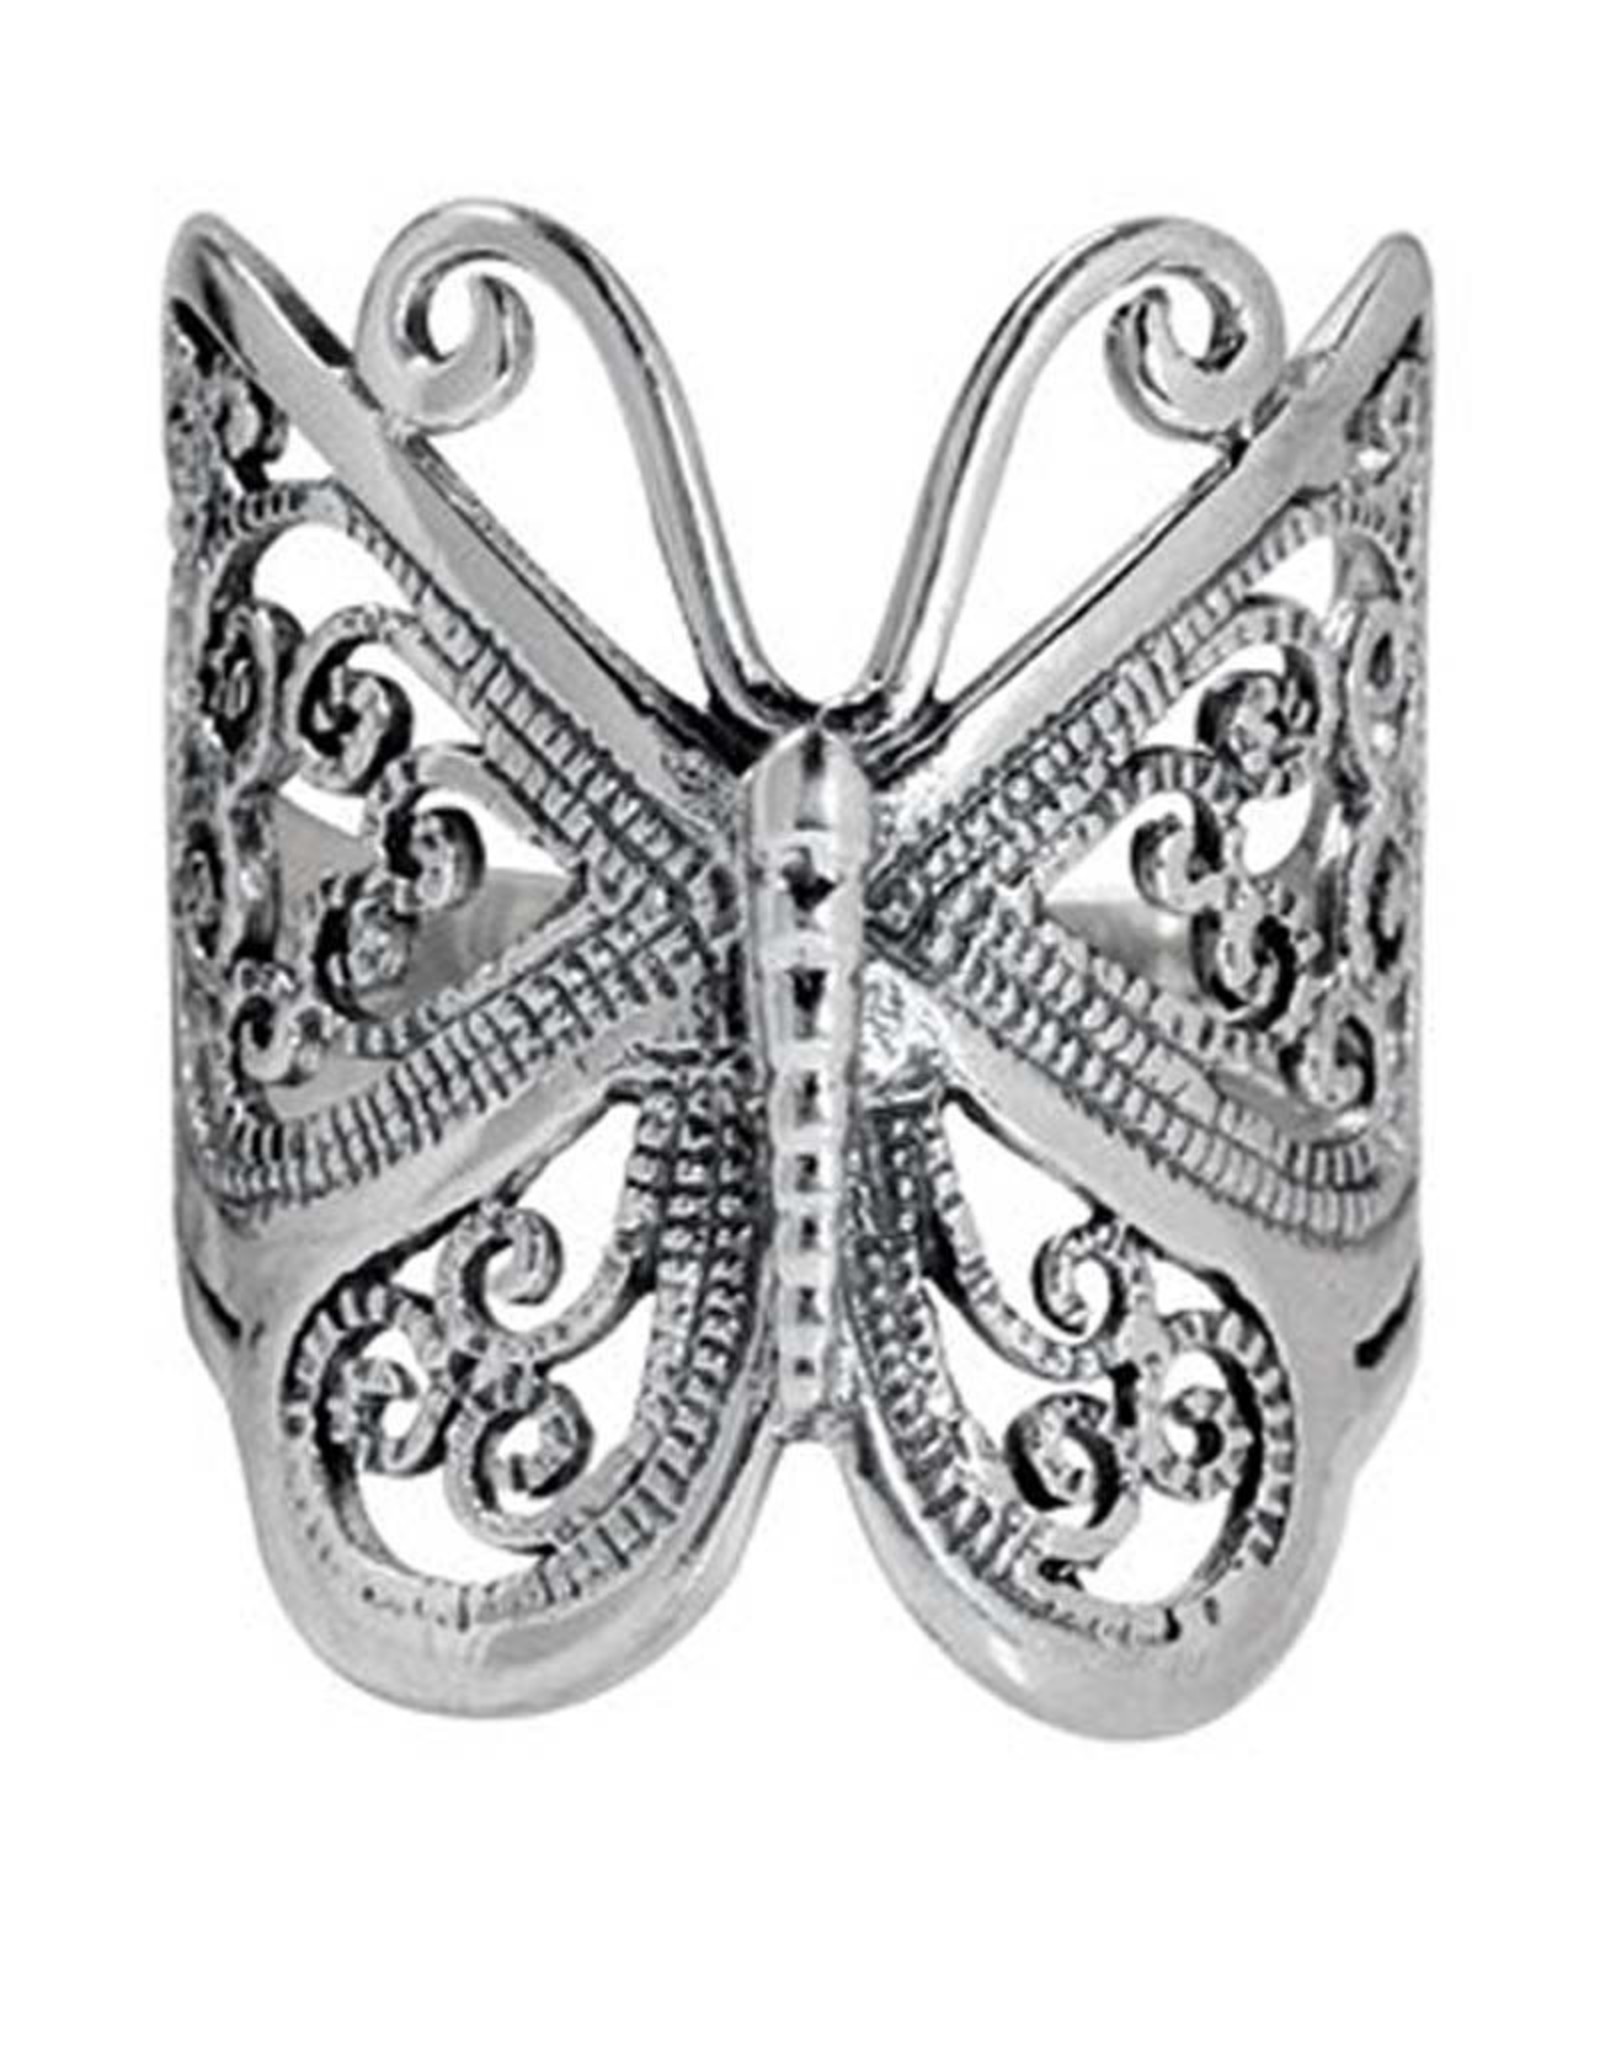 Butterfly Filigree Ring Sterling Silver - Size 9